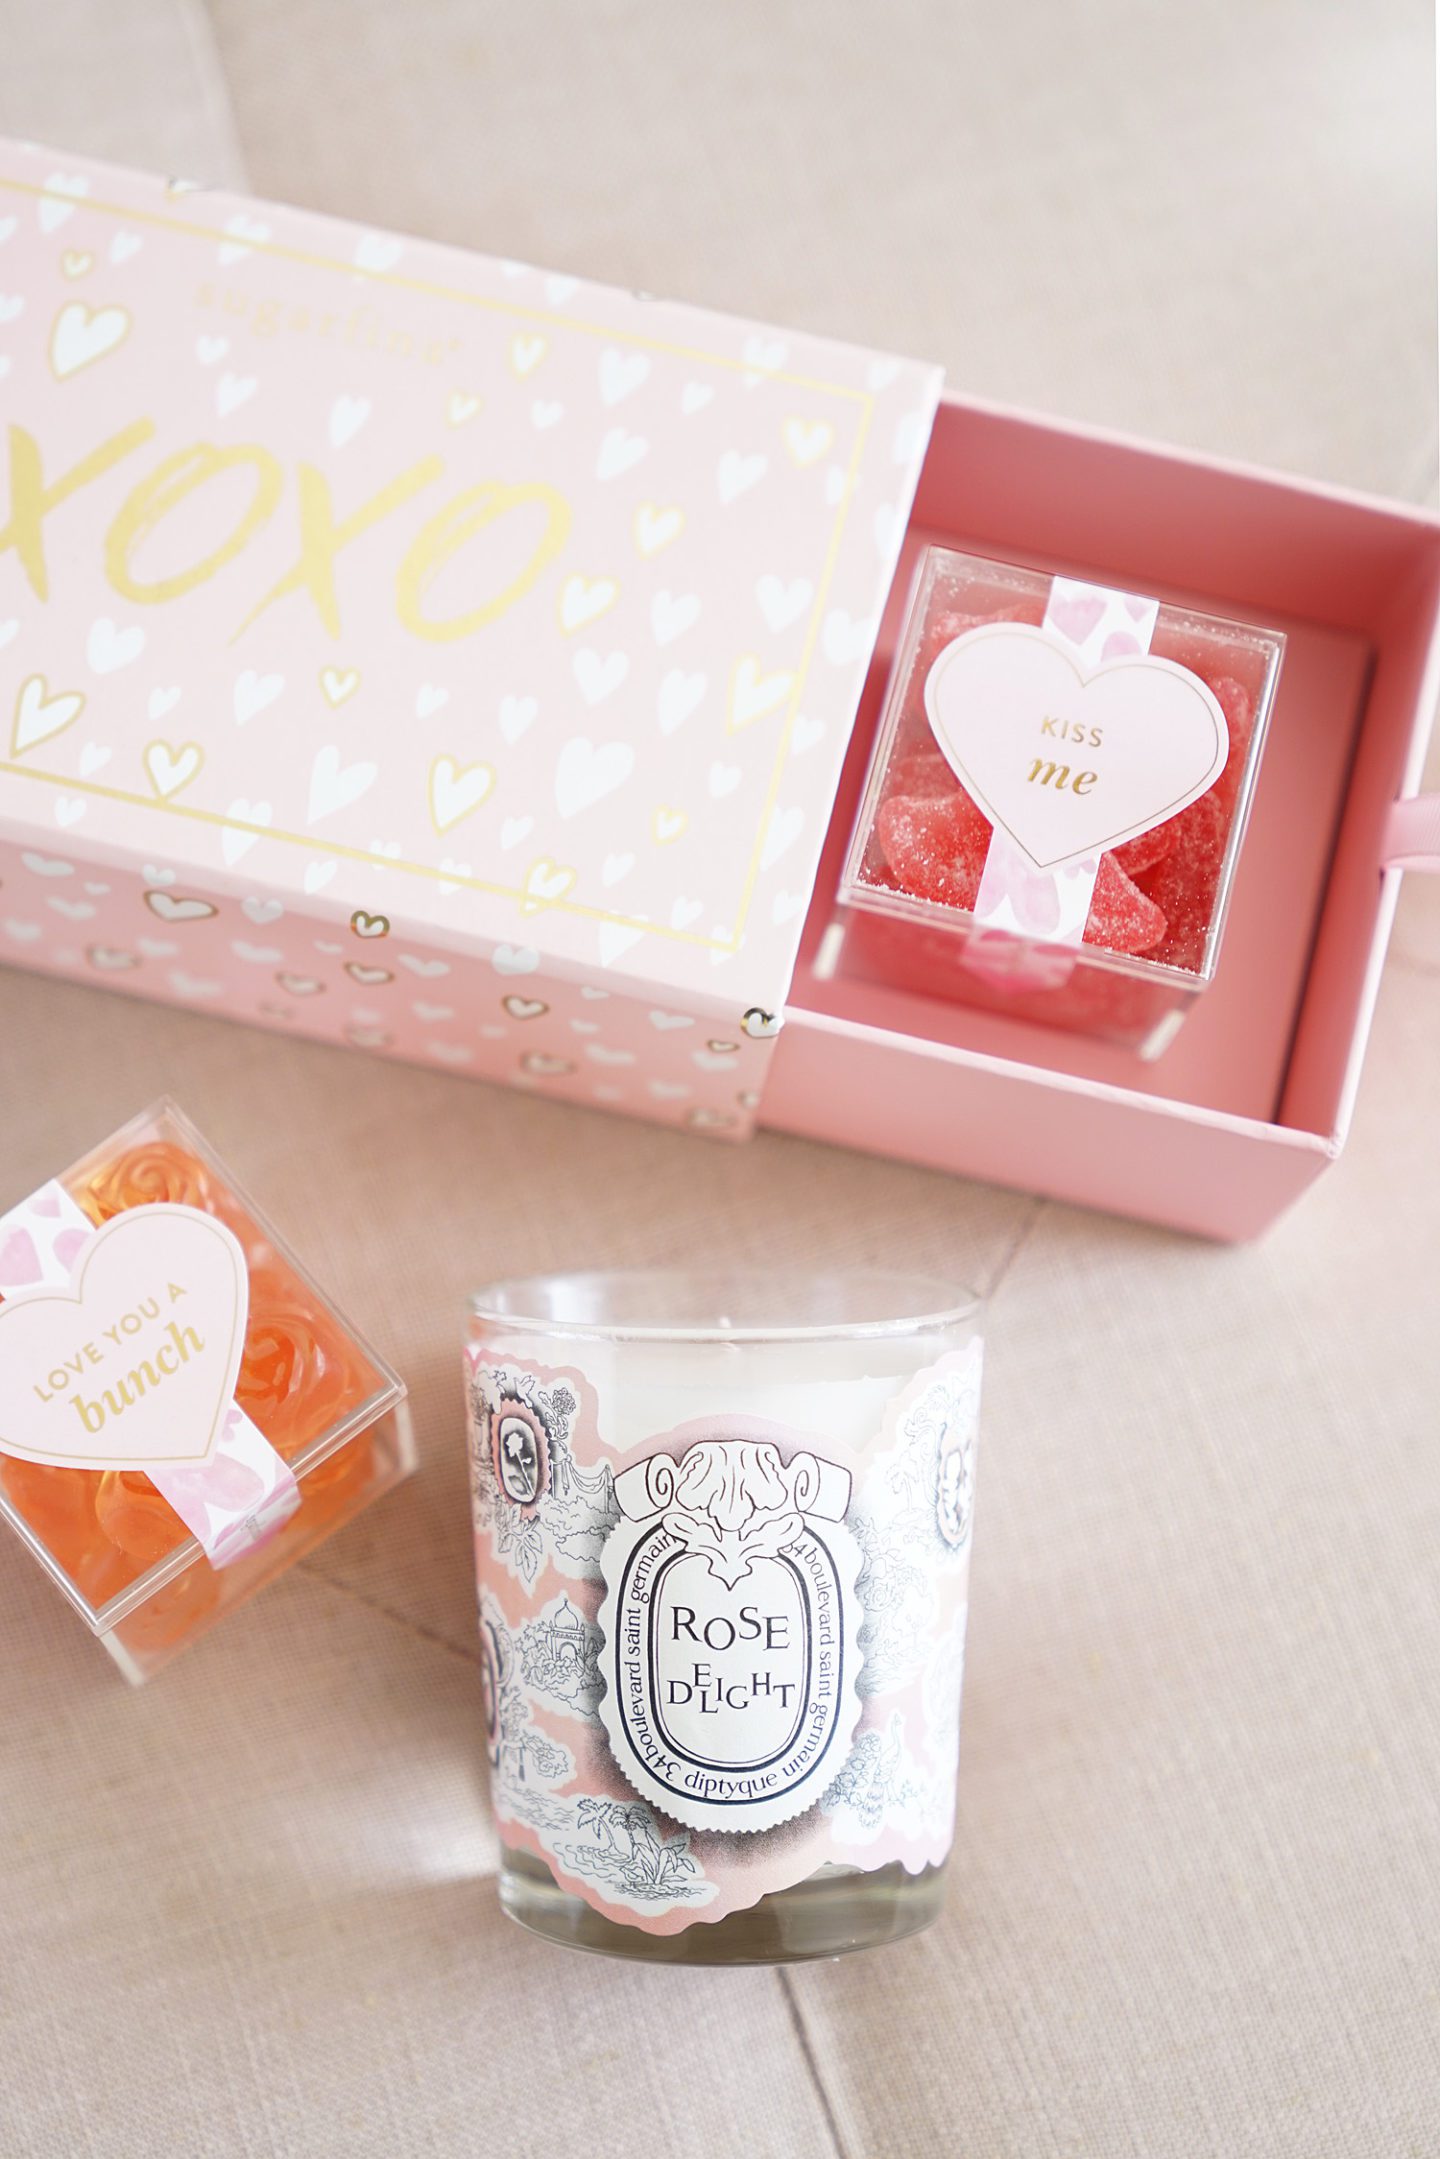 Sugarfina Valentine's Day Duo and Diptyque Rose Delight Candle | The Beauty Look Book